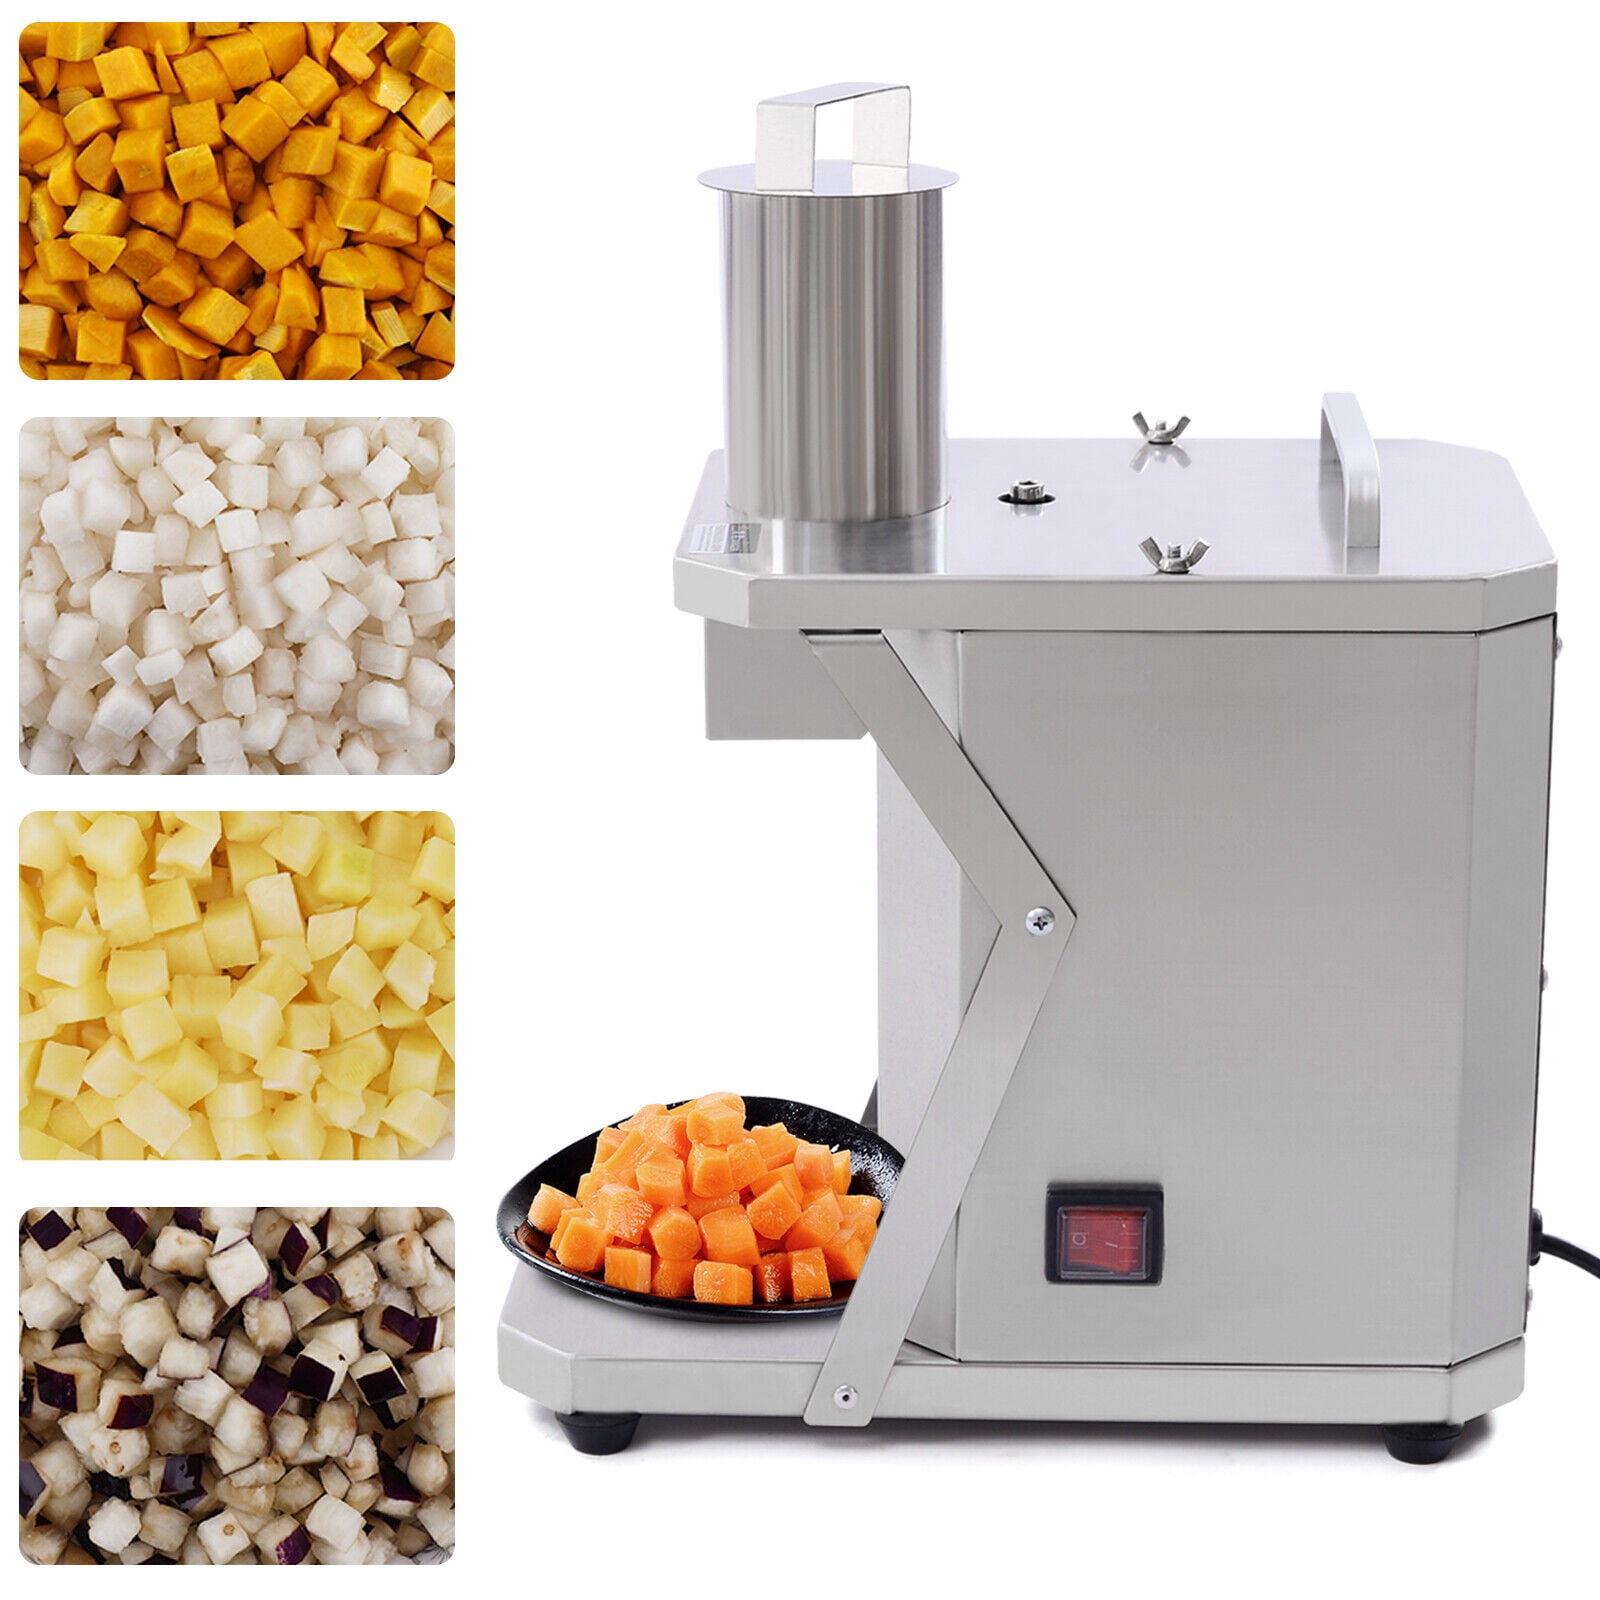 Commercial vegetable dicing machine usage and maintain